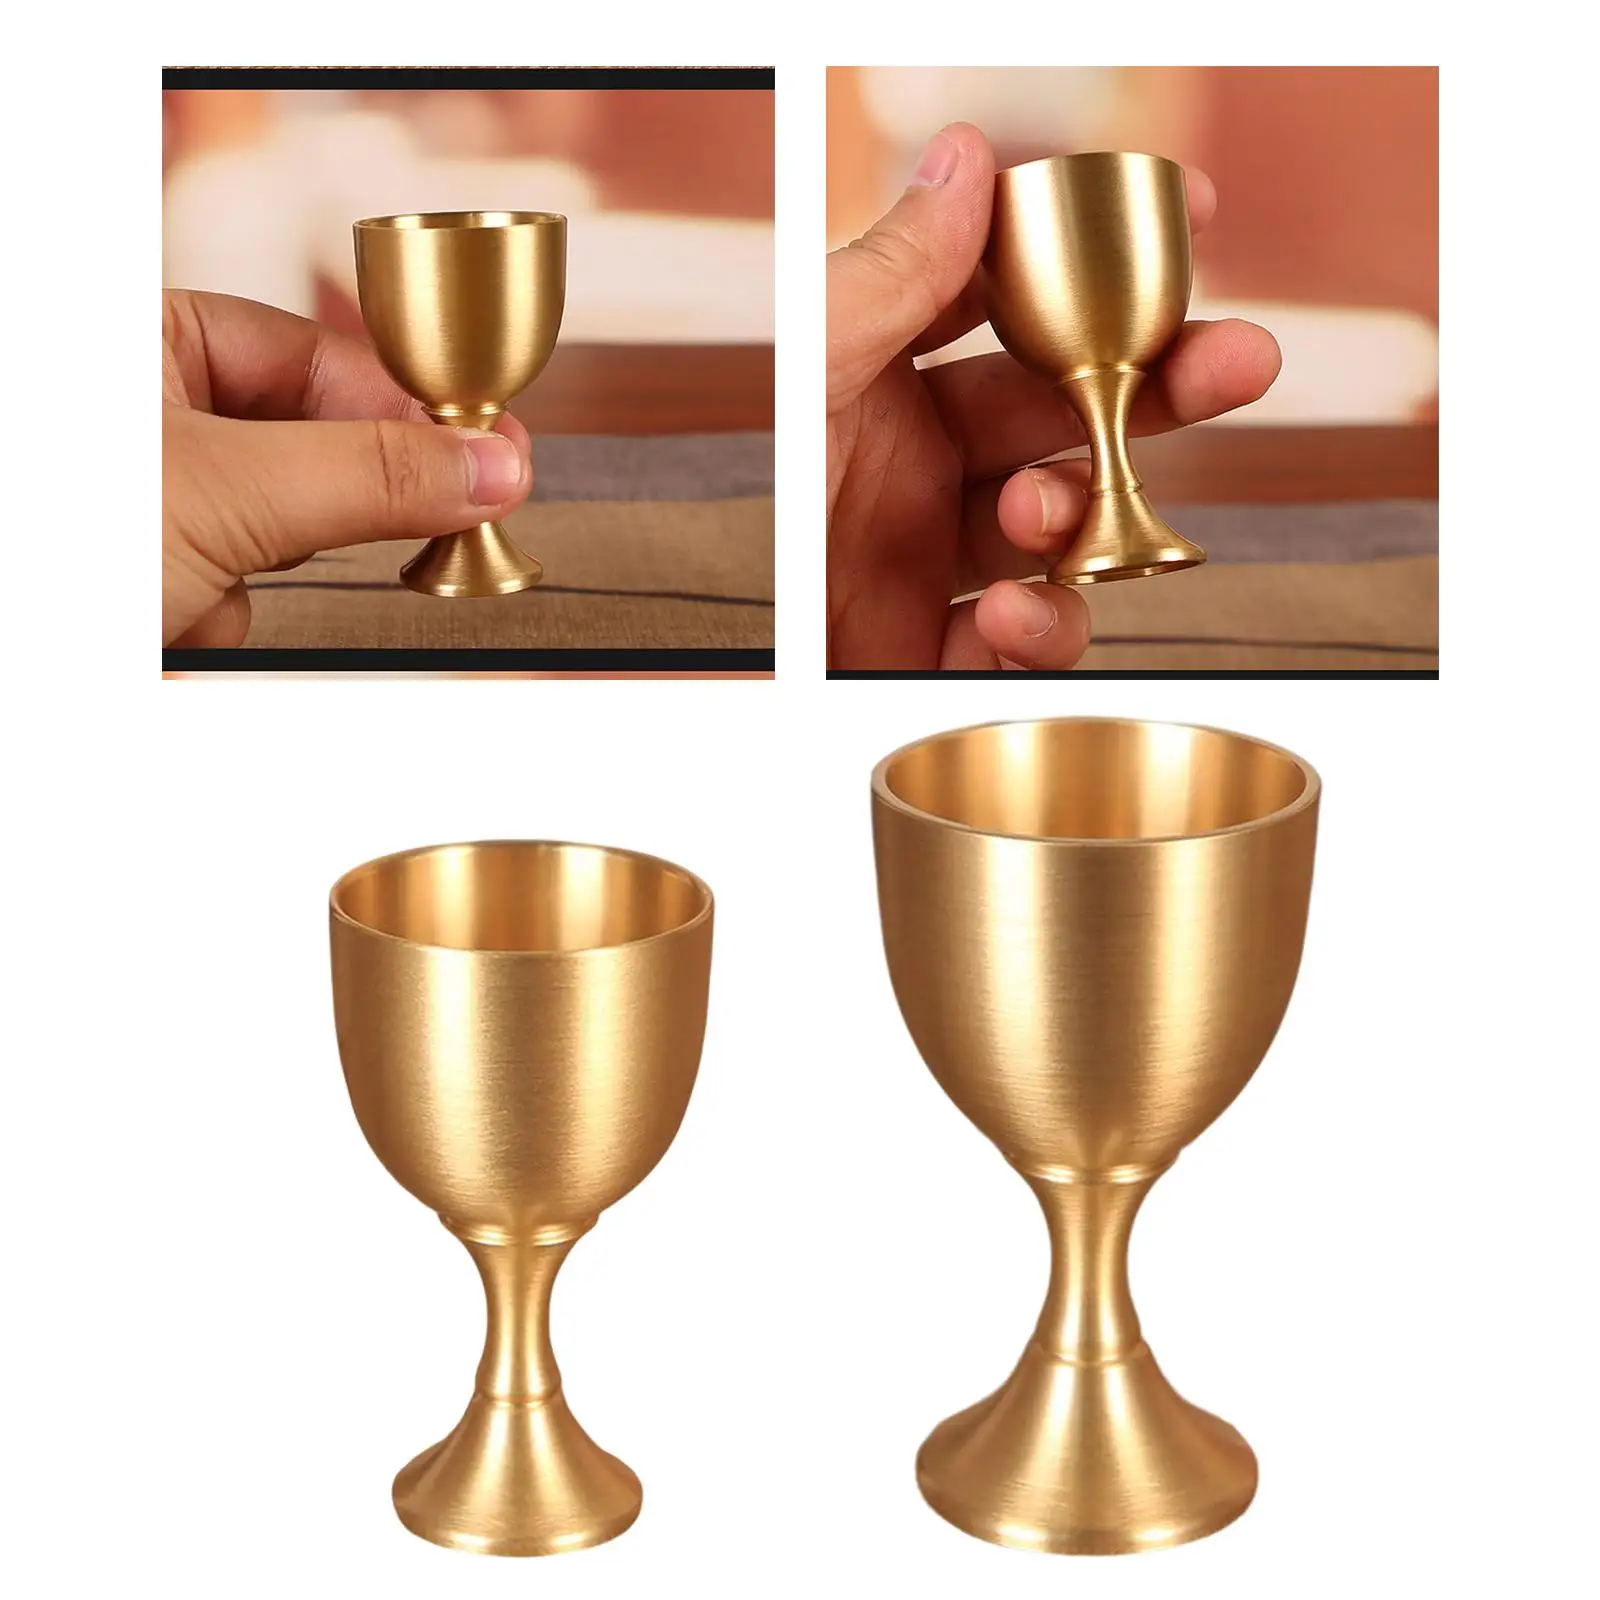 Vintage Brass Wine Glasses Reusable Handmade Cocktail Glasses for Club Party Decor